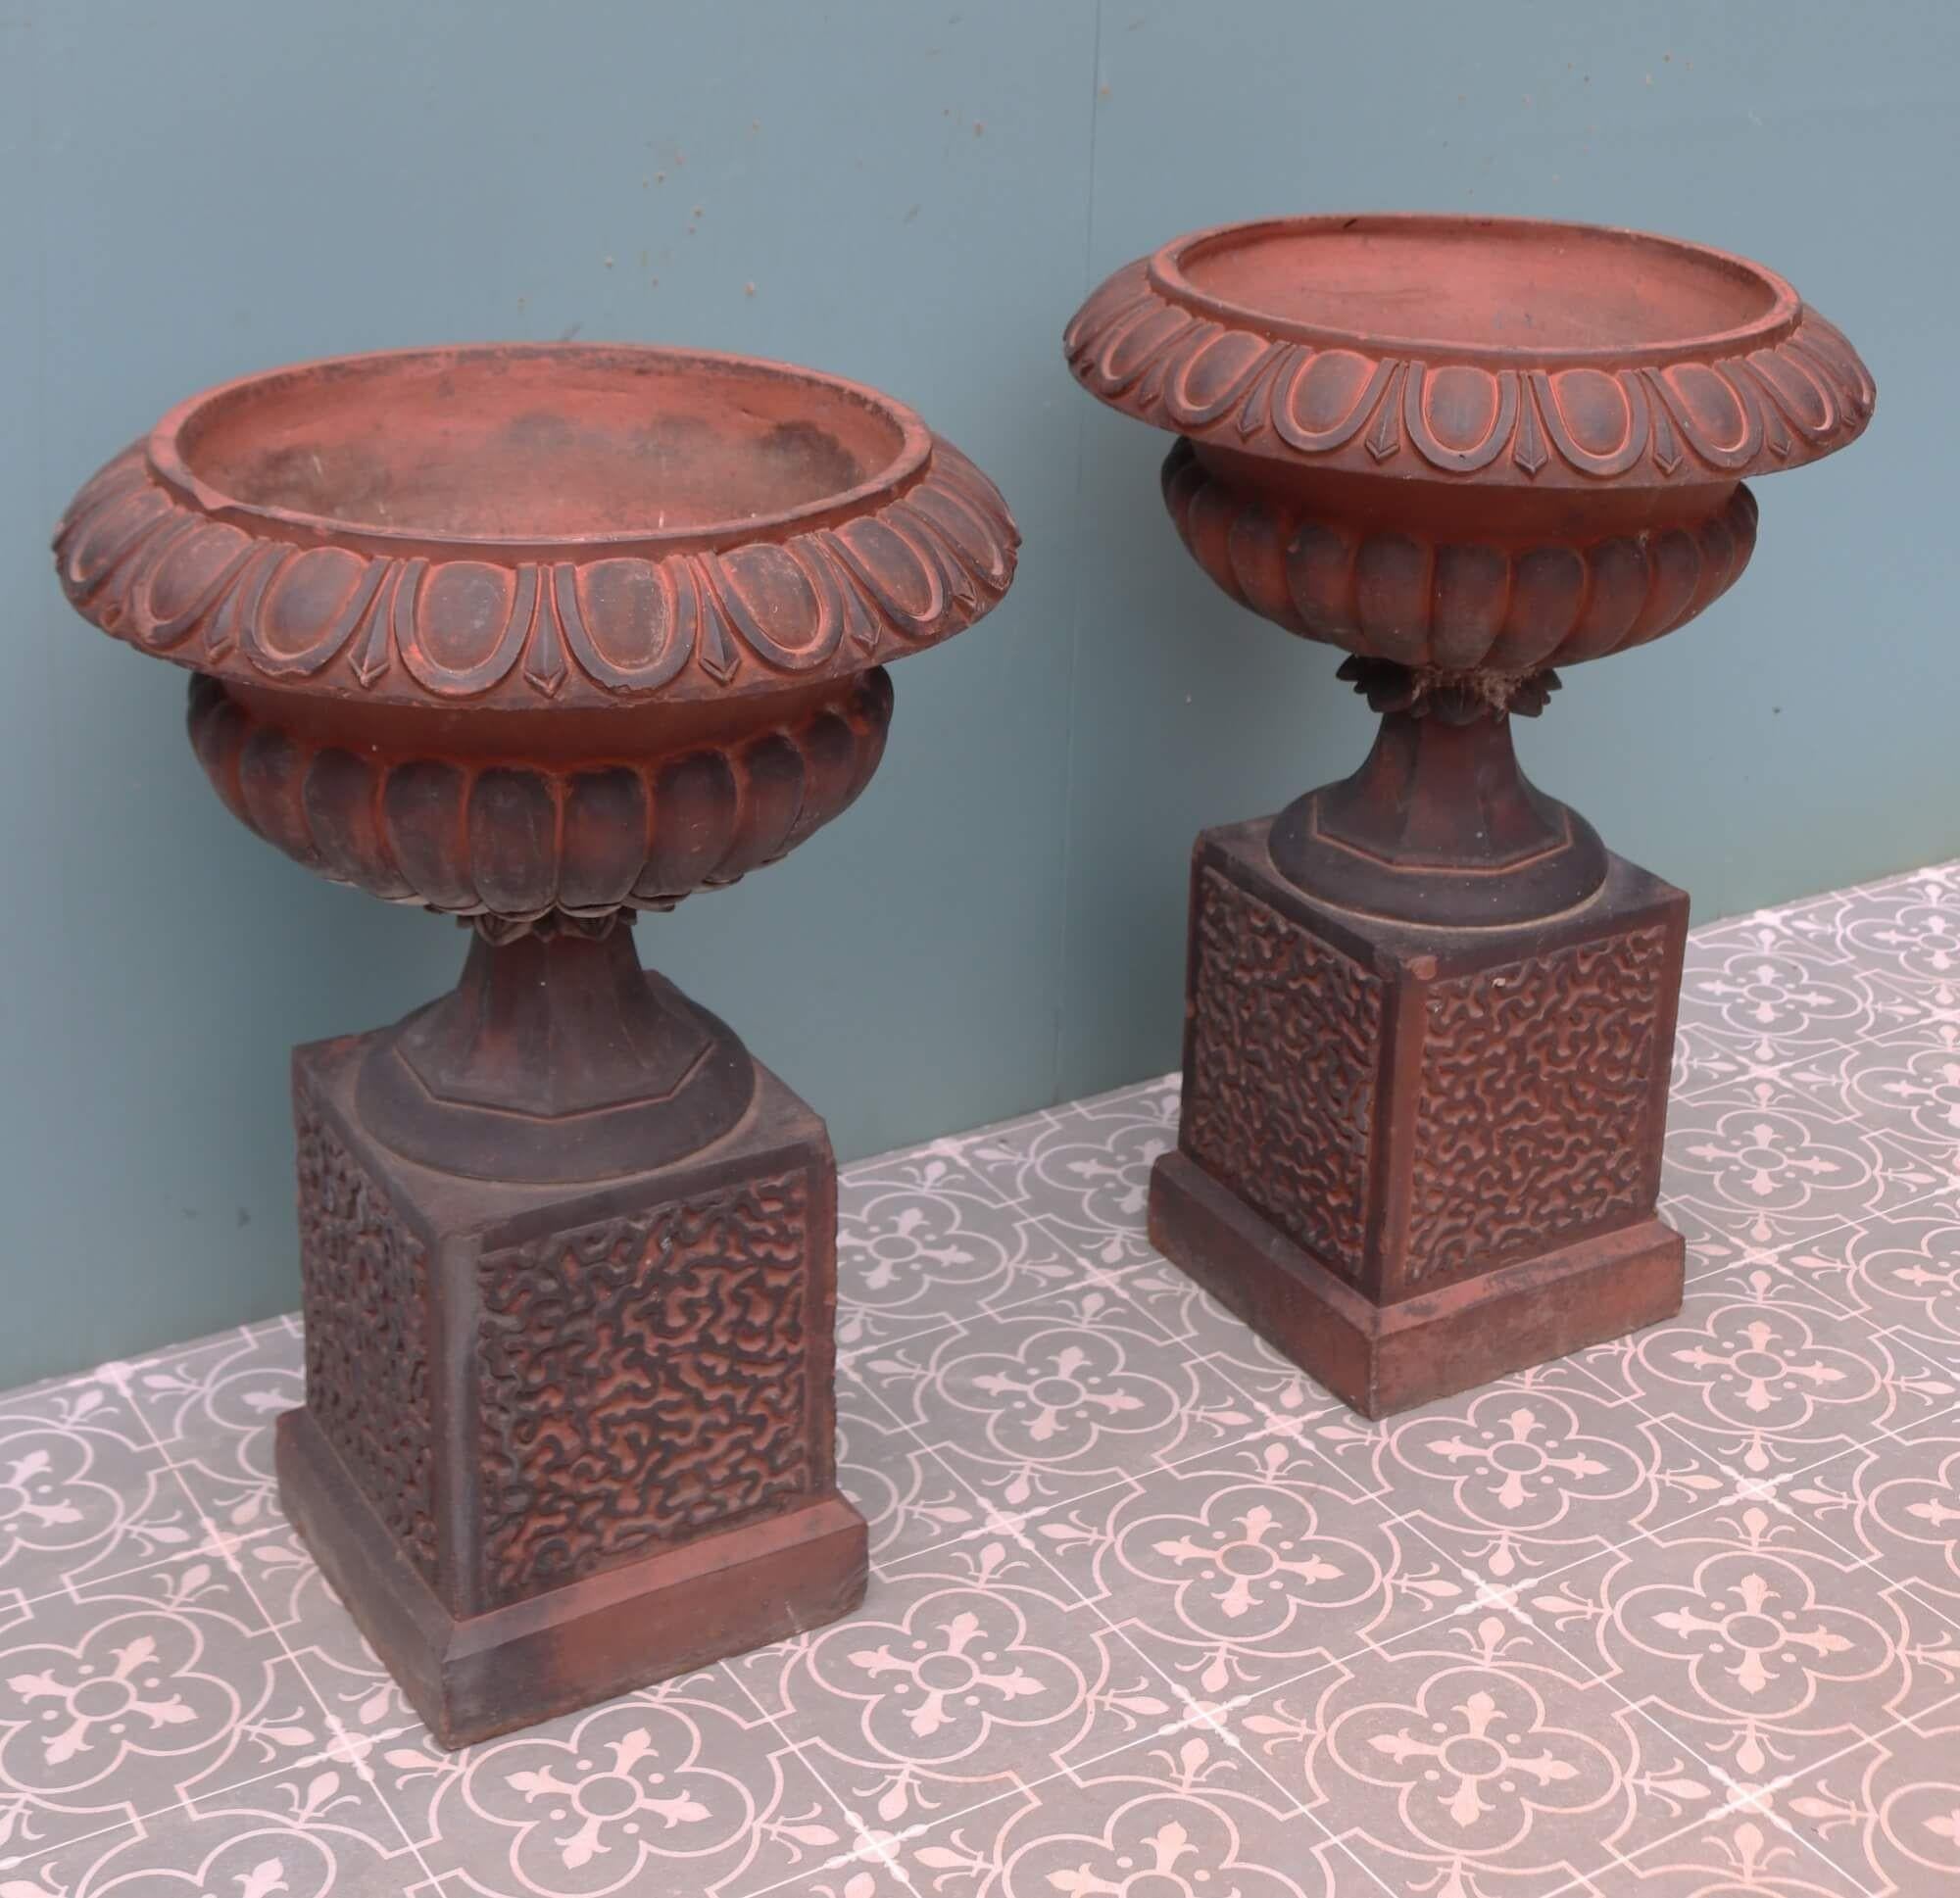 A Pair of Antique Garden Urn Planters in Terracotta In Fair Condition For Sale In Wormelow, Herefordshire